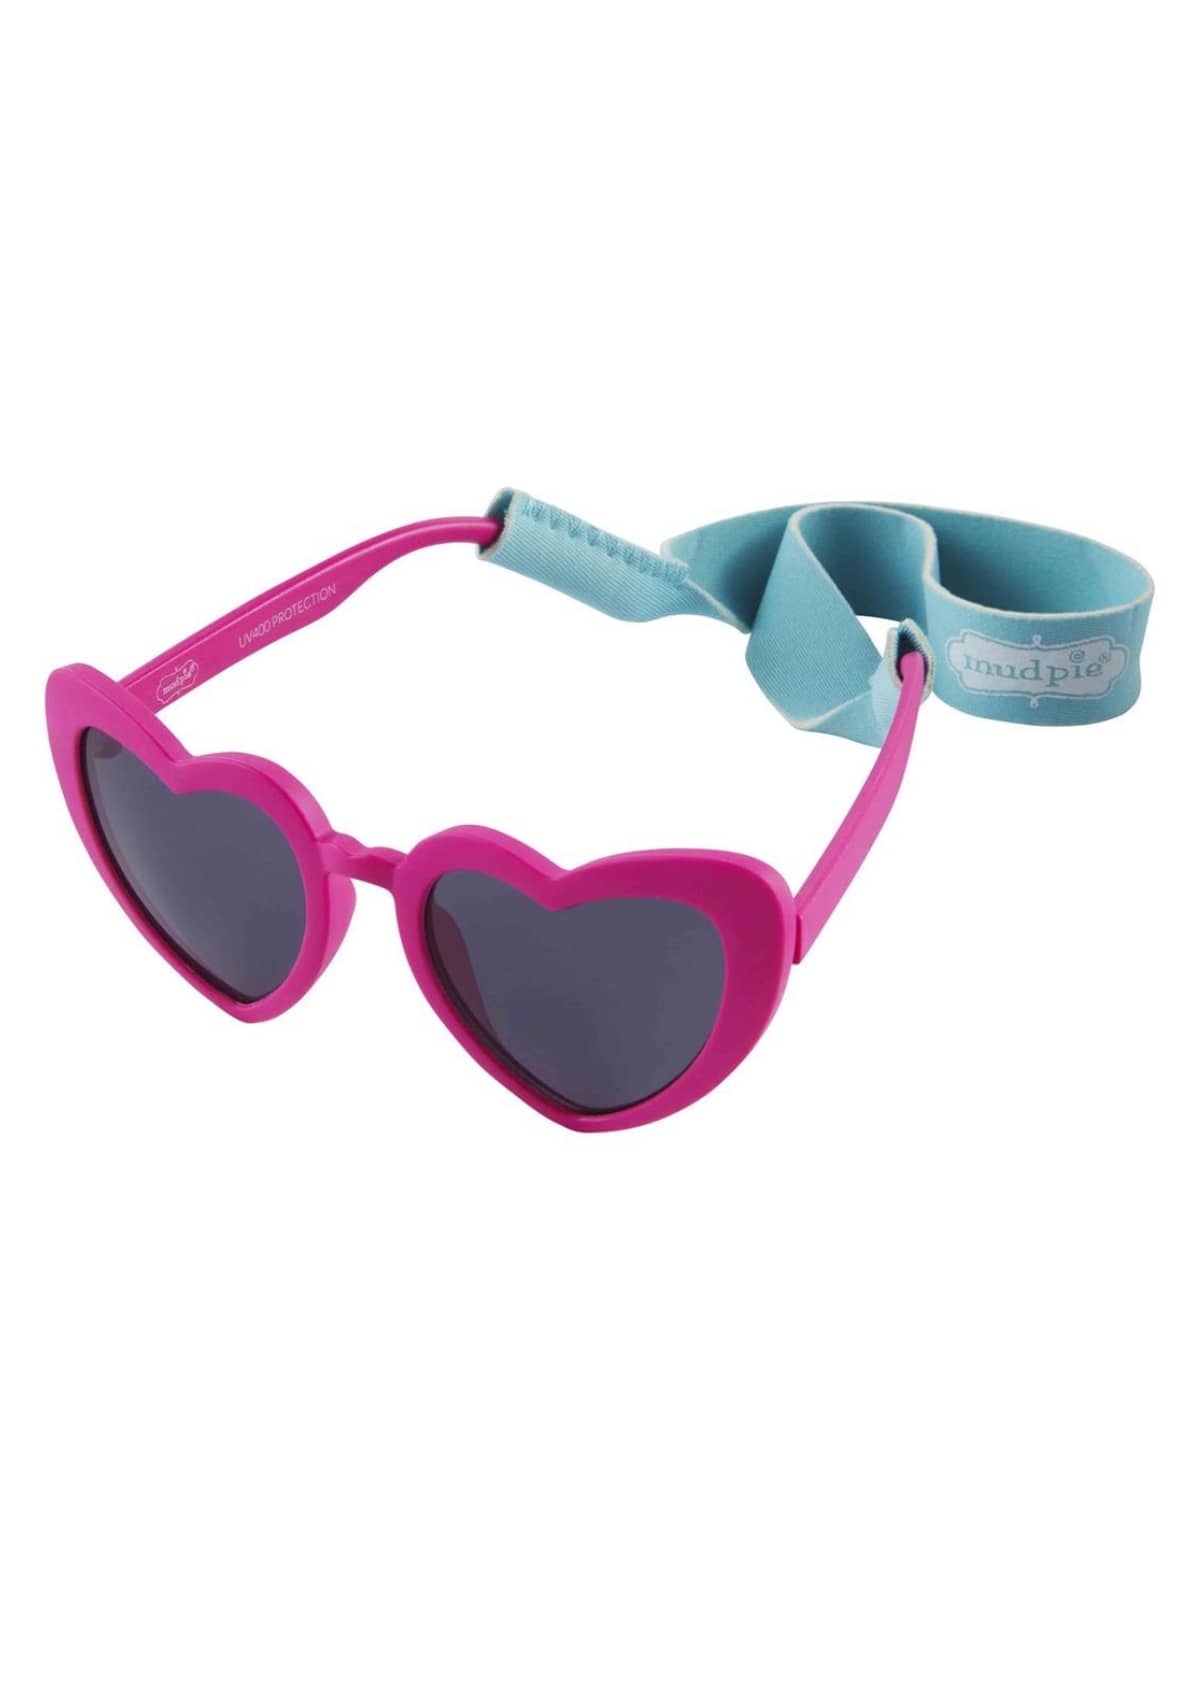 Accessories For the Littles-New Accessories For the Littles-Sunglasses For the Littles-Ruby Jane.